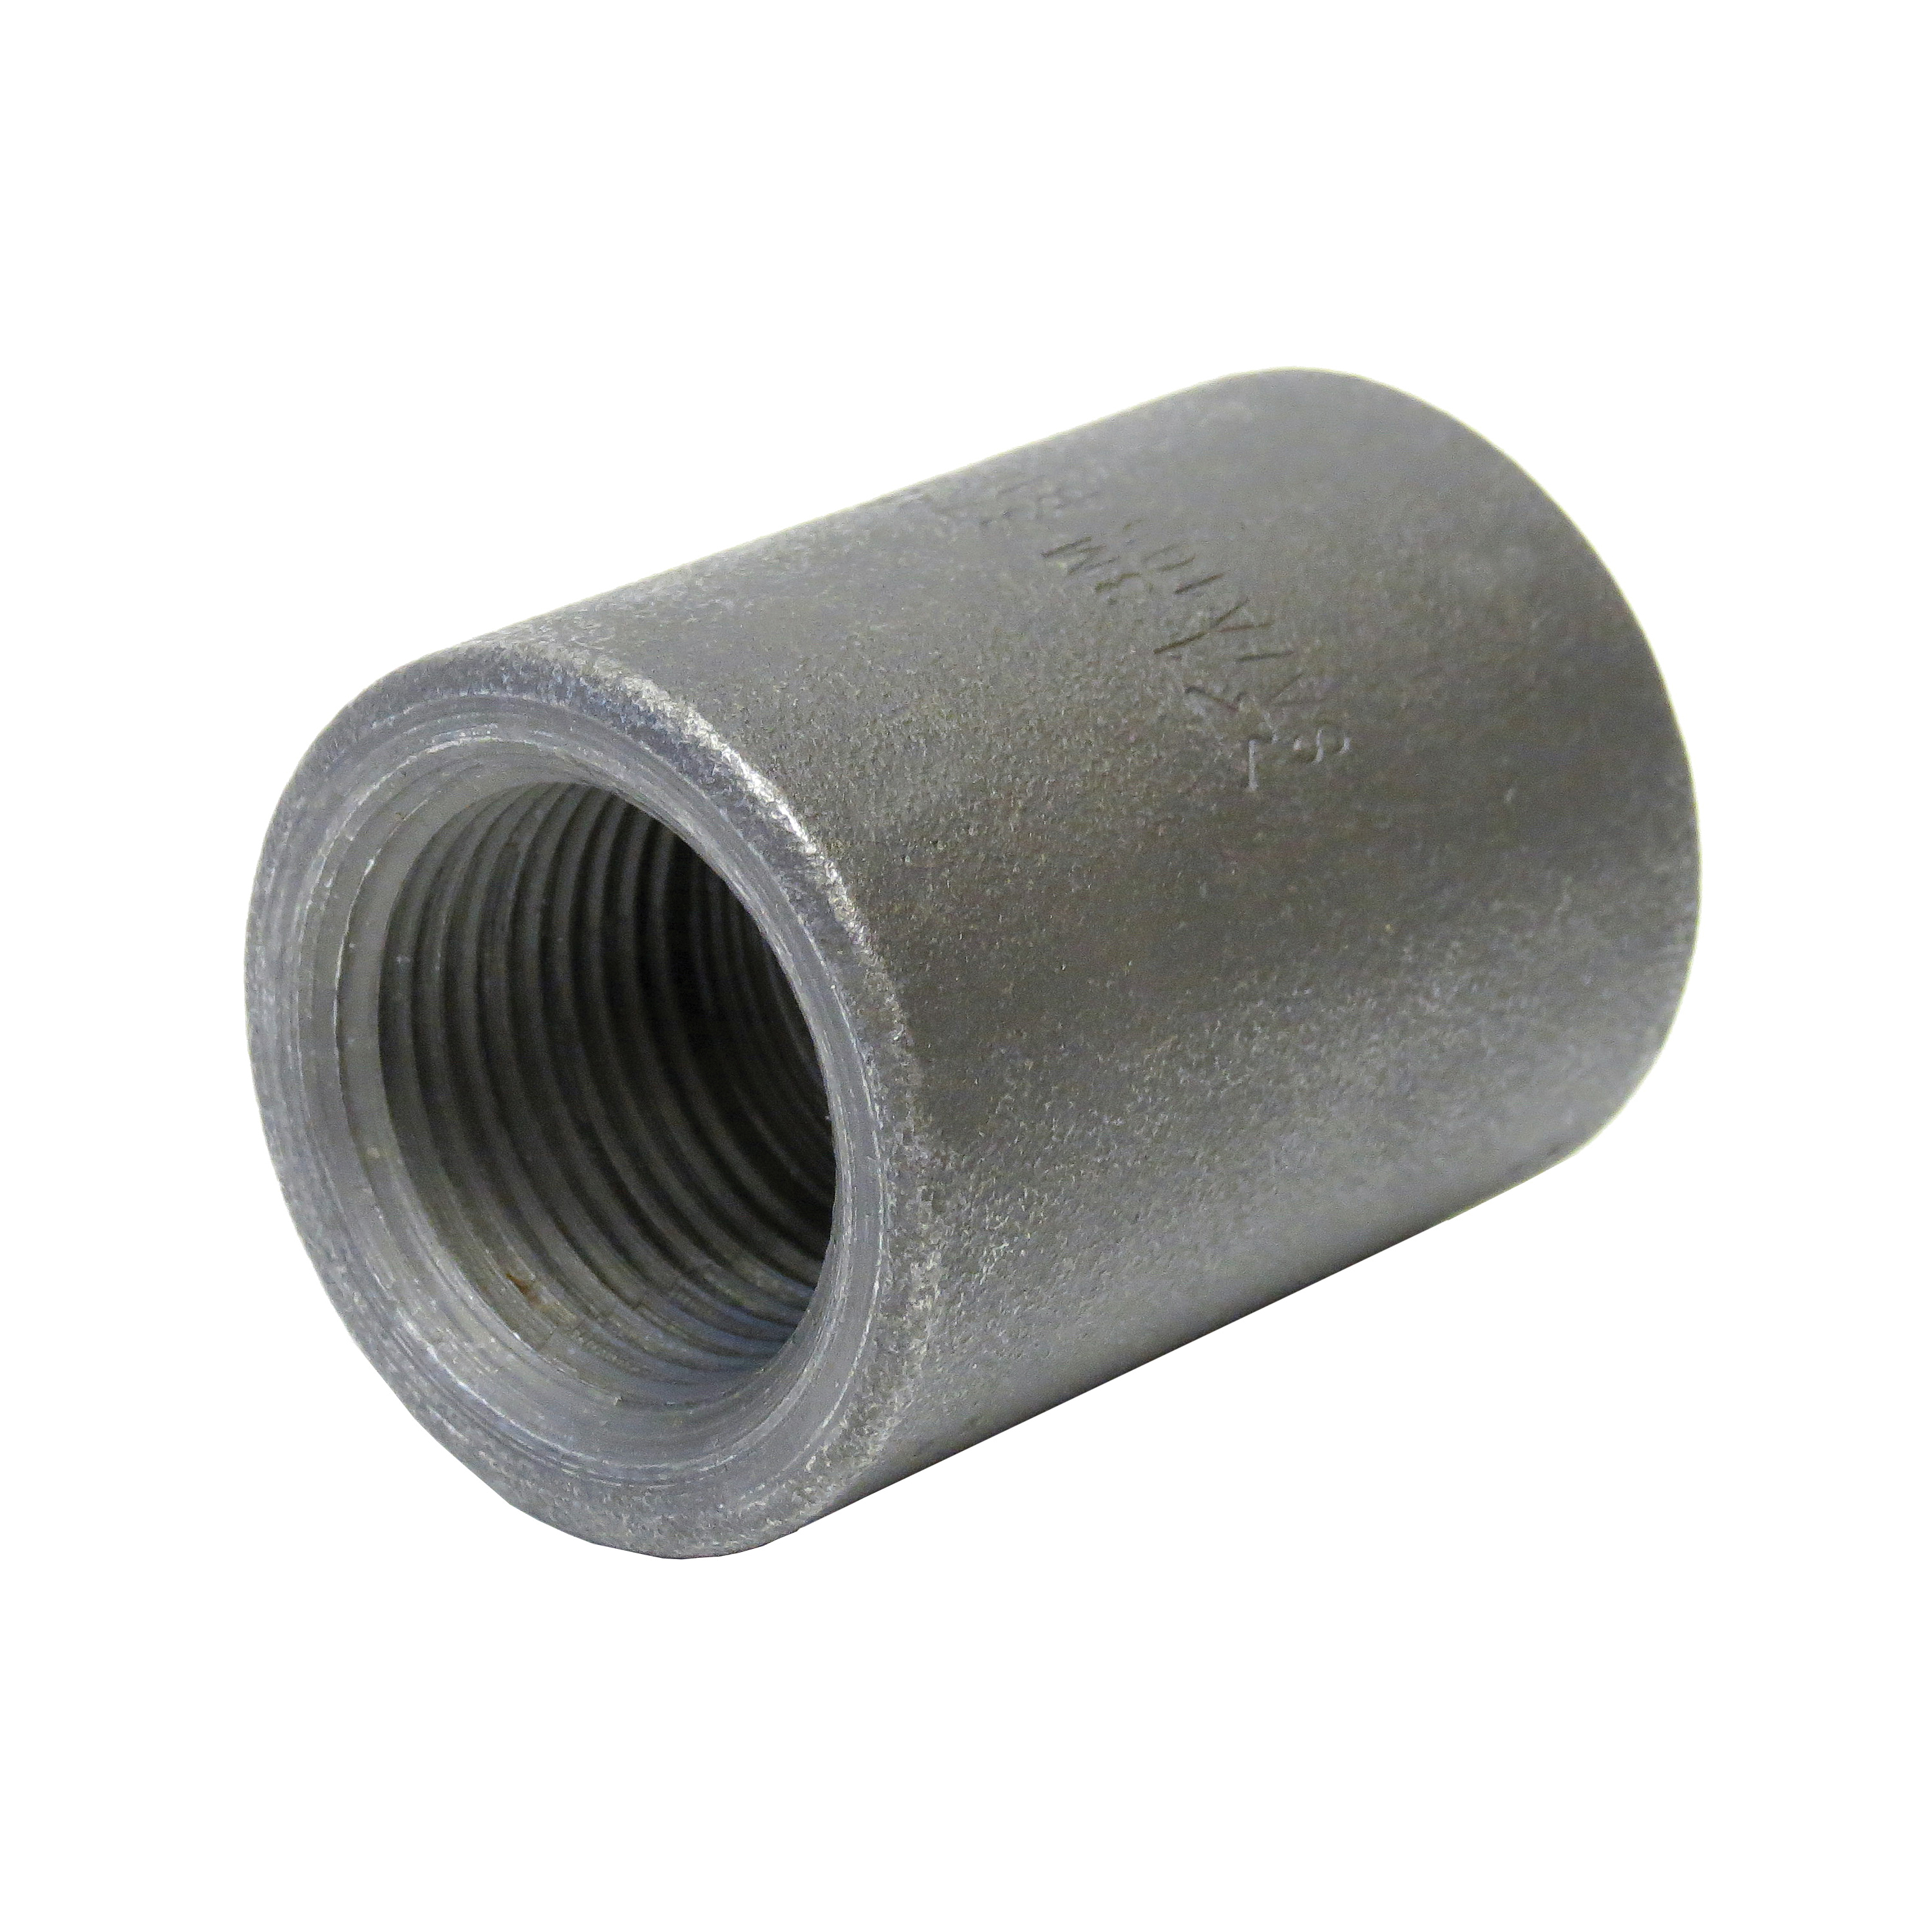 Anvil® 0361156805 FIG 2117 Pipe Coupling, 2-1/2 in Nominal, FNPT End Style, 3000 lb, Steel, Black Oxide, Domestic